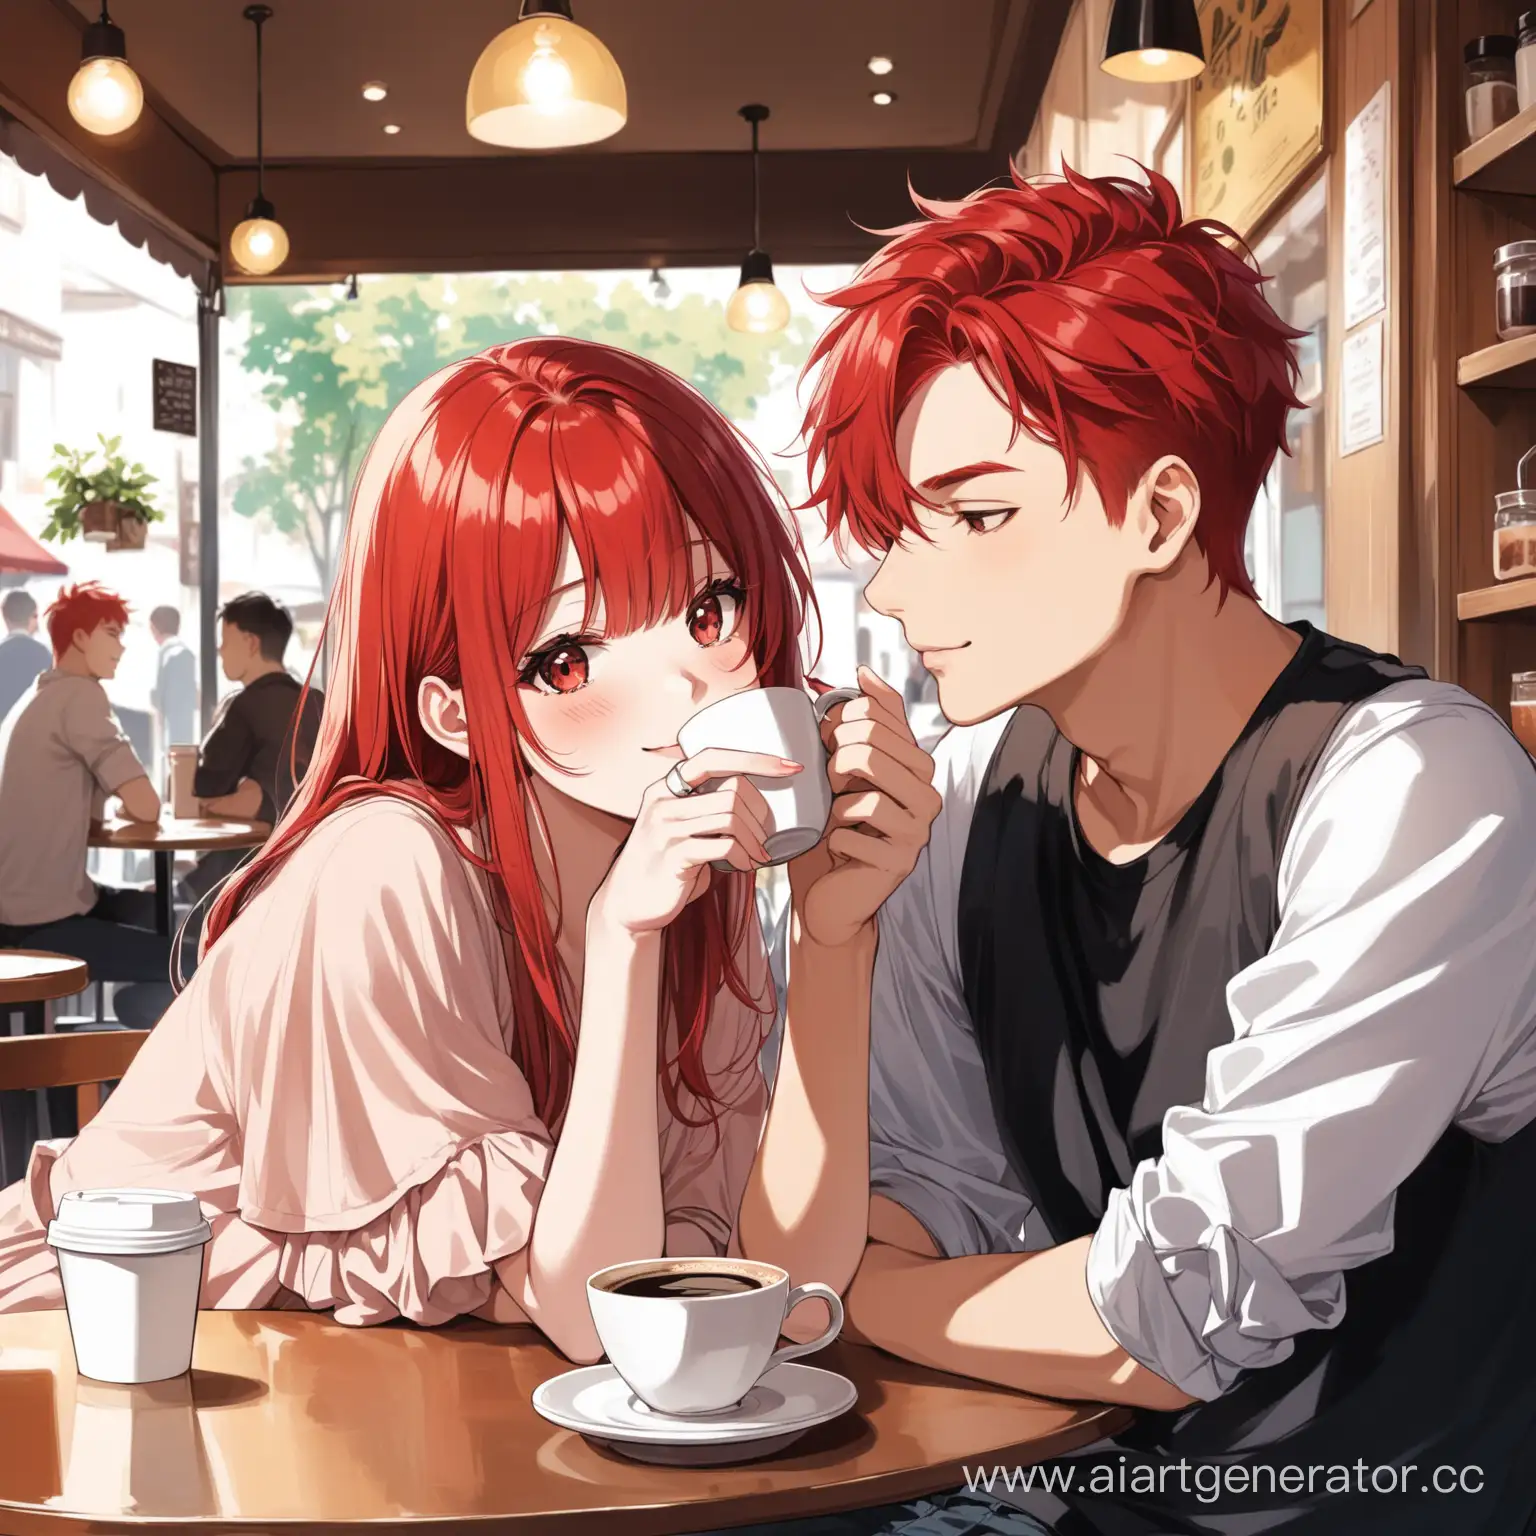 Redhaired-Girl-and-Boy-Enjoying-Coffee-at-a-Caf